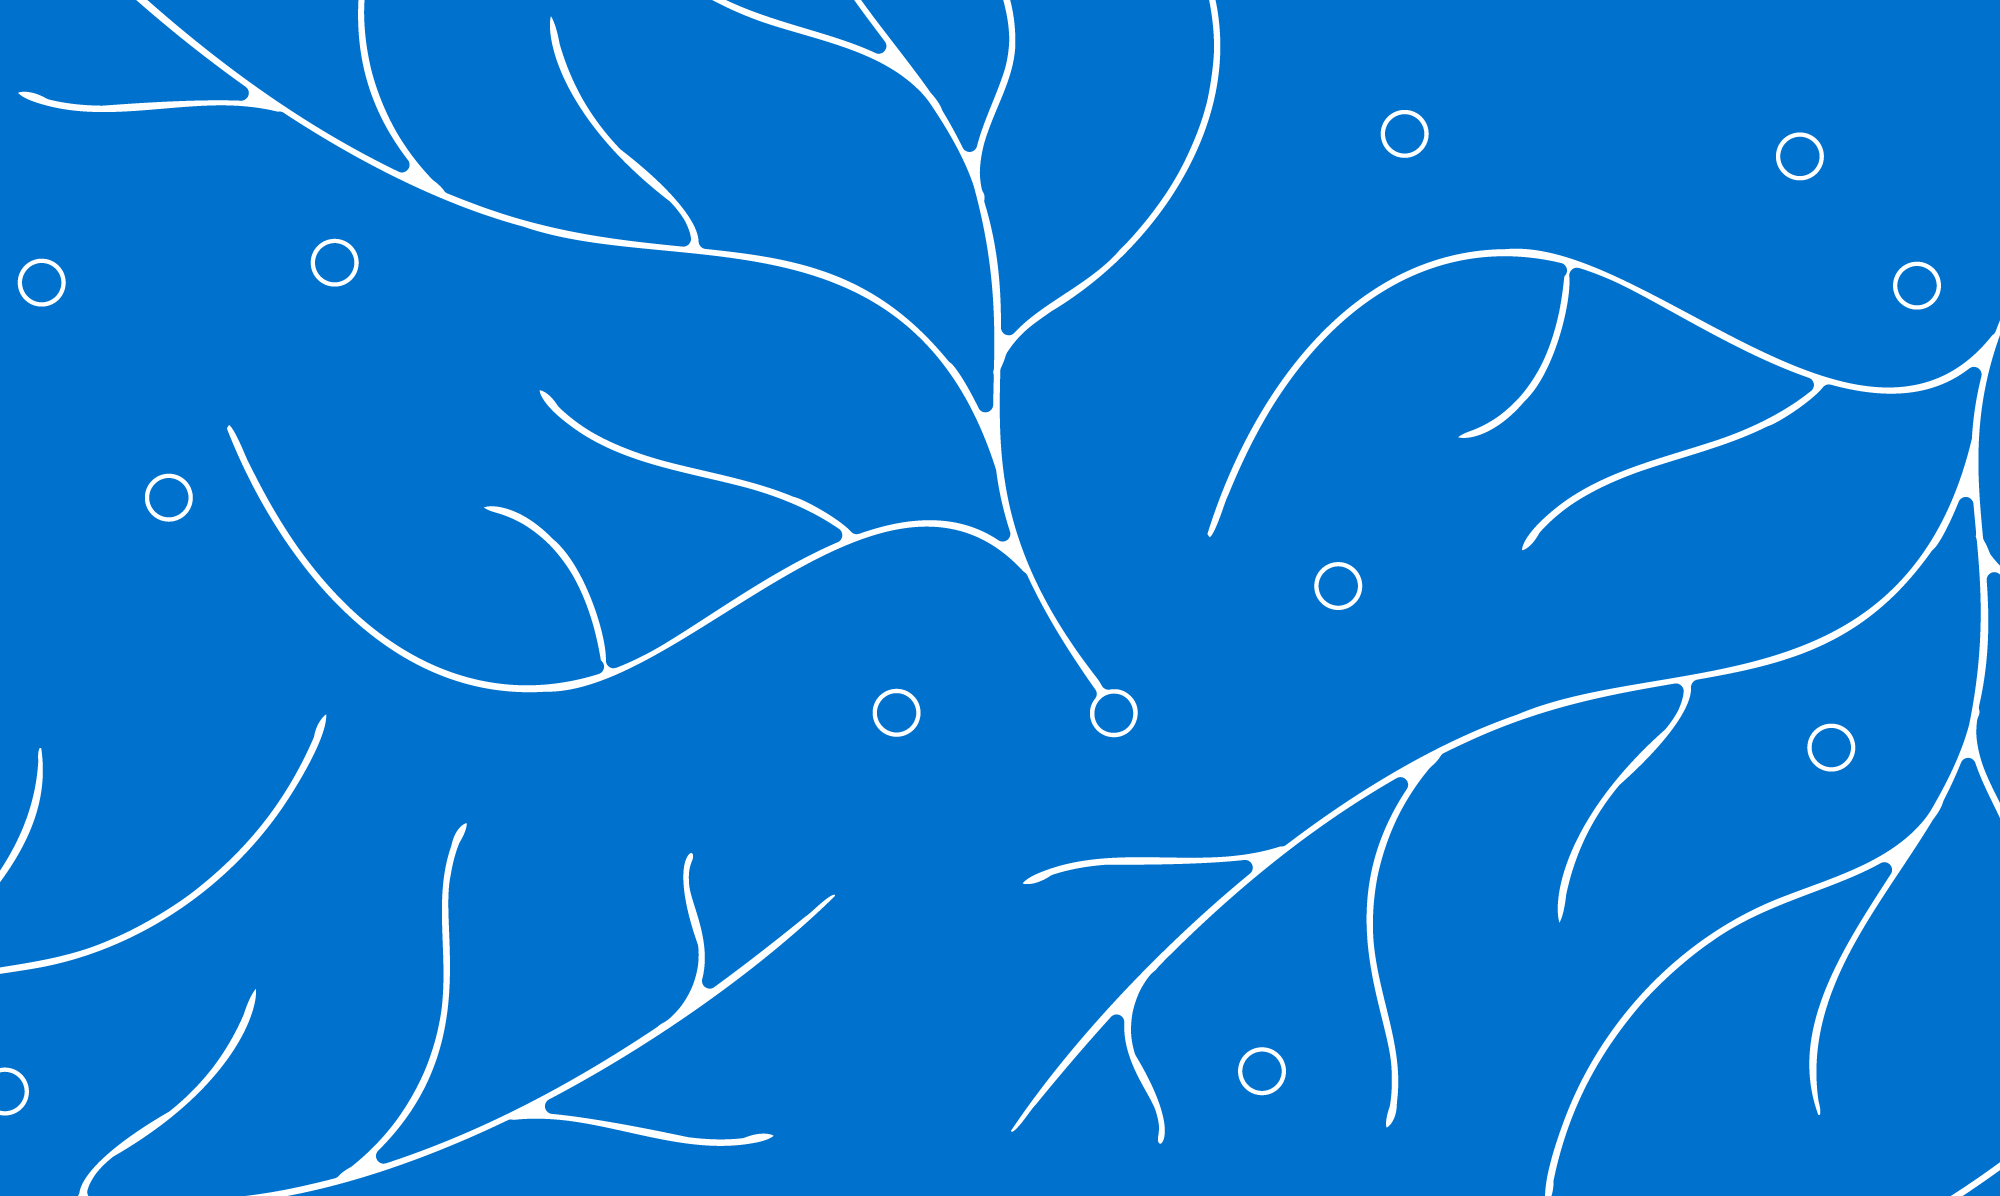 Pattern 5 - White on Blue@2000x.png